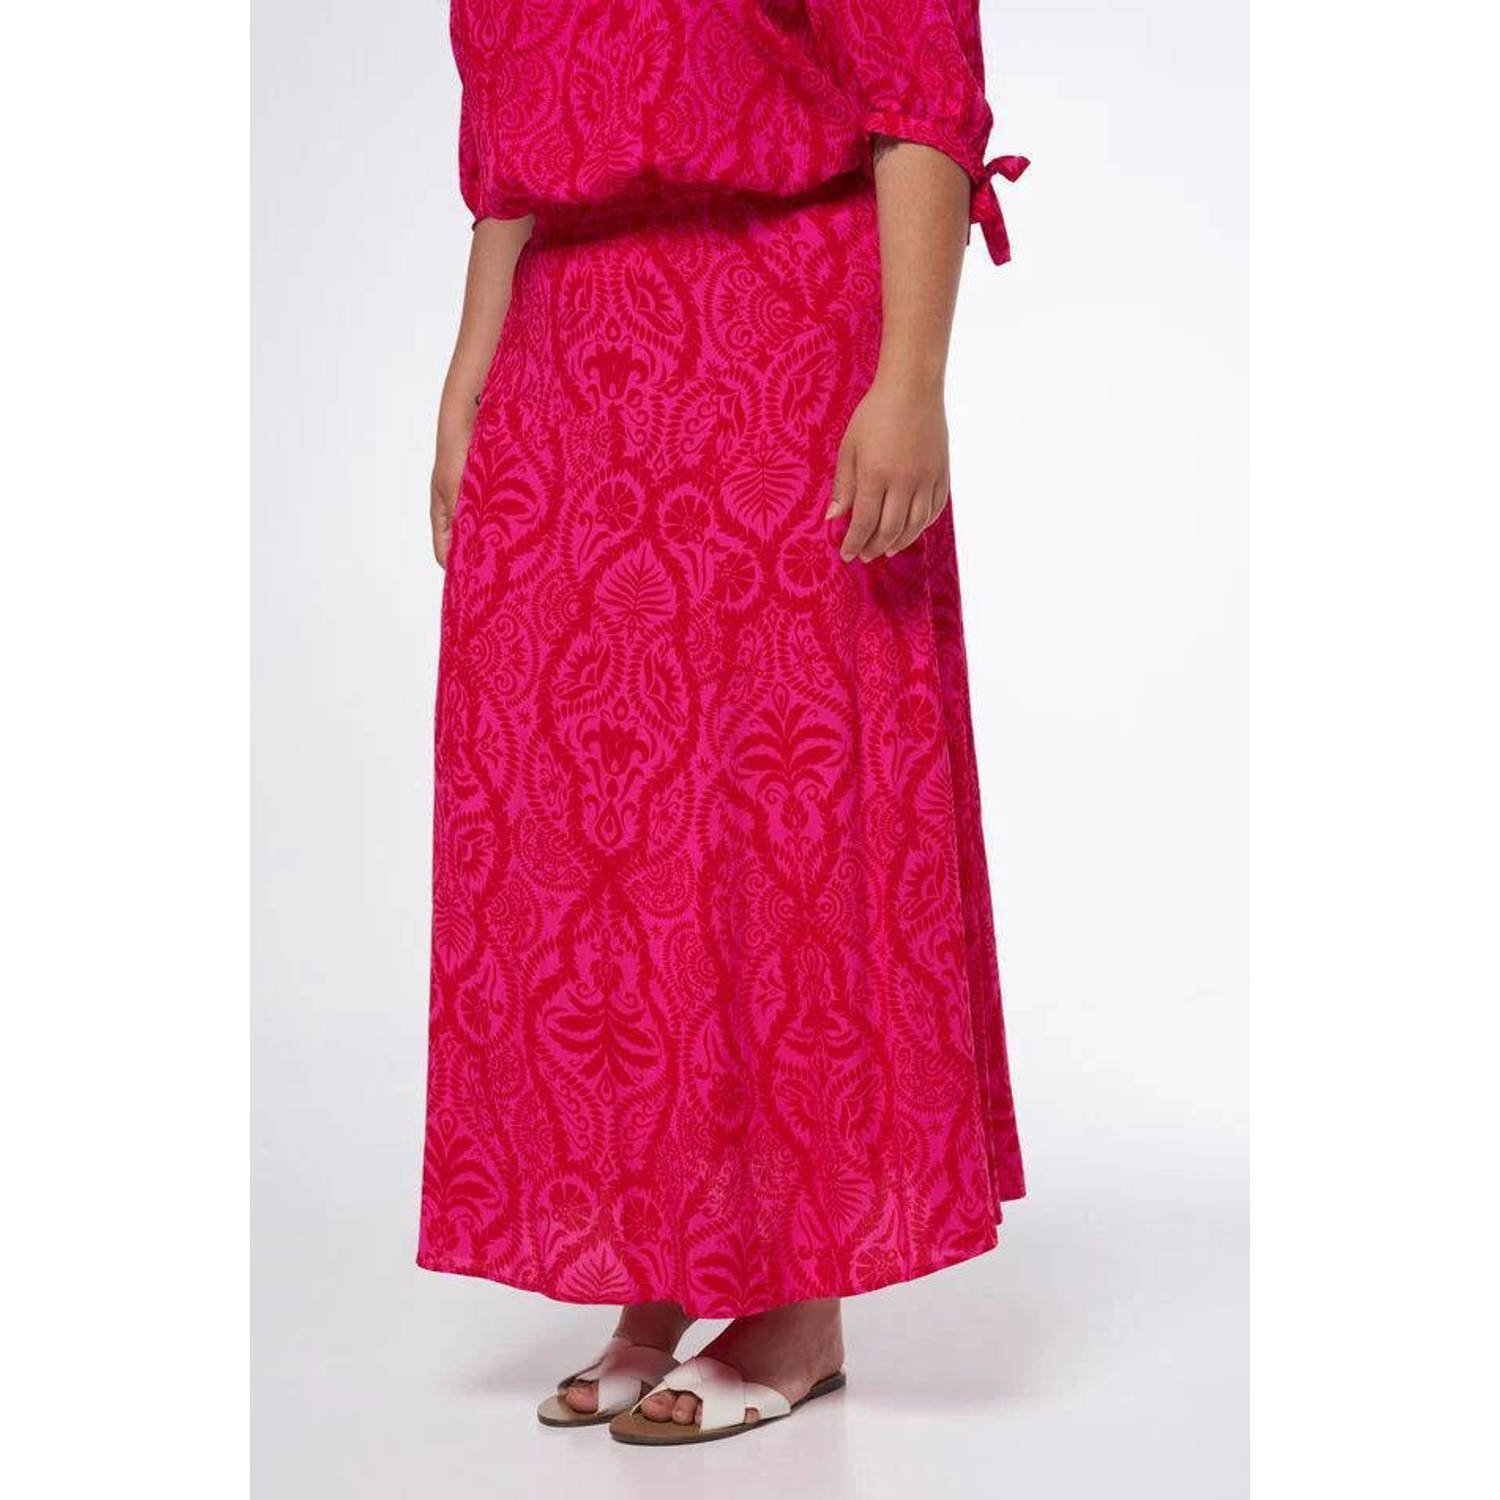 MS Mode maxi rok met paisleyprint roze rood